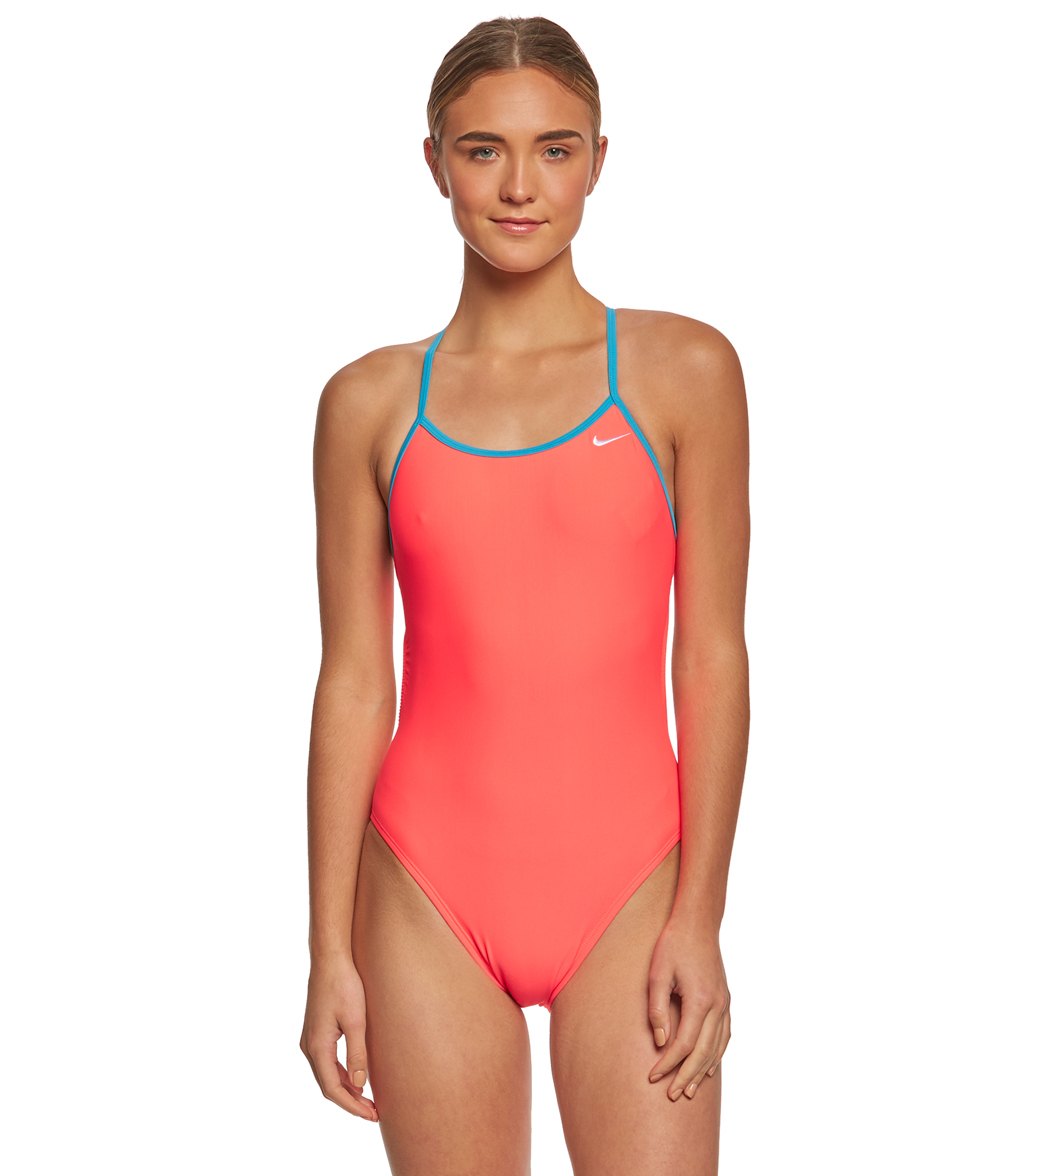 Nike Women's Solid Crossback One Piece Swimsuit at SwimOutlet.com